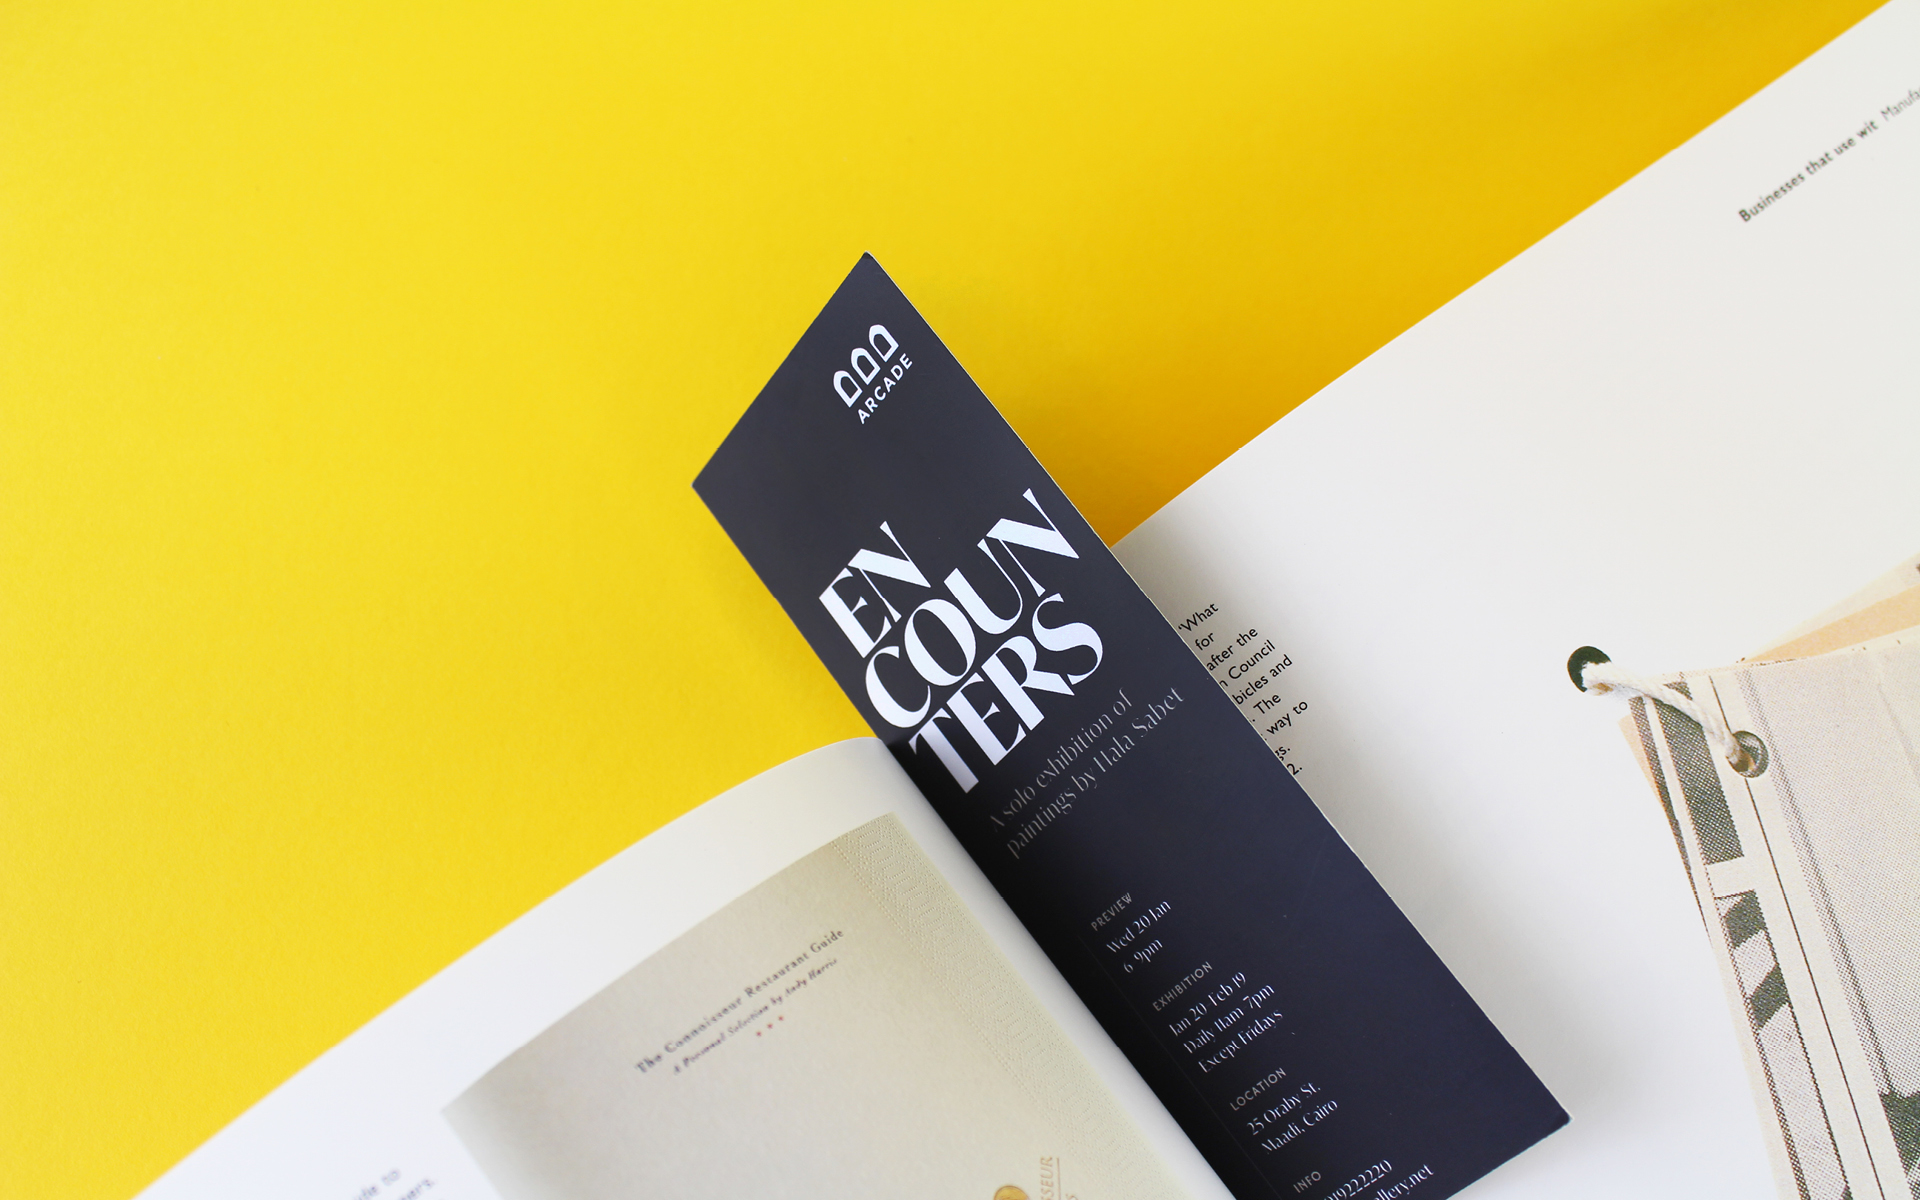 Bookmark design as part of exhibition print collateral for Hala Sabet